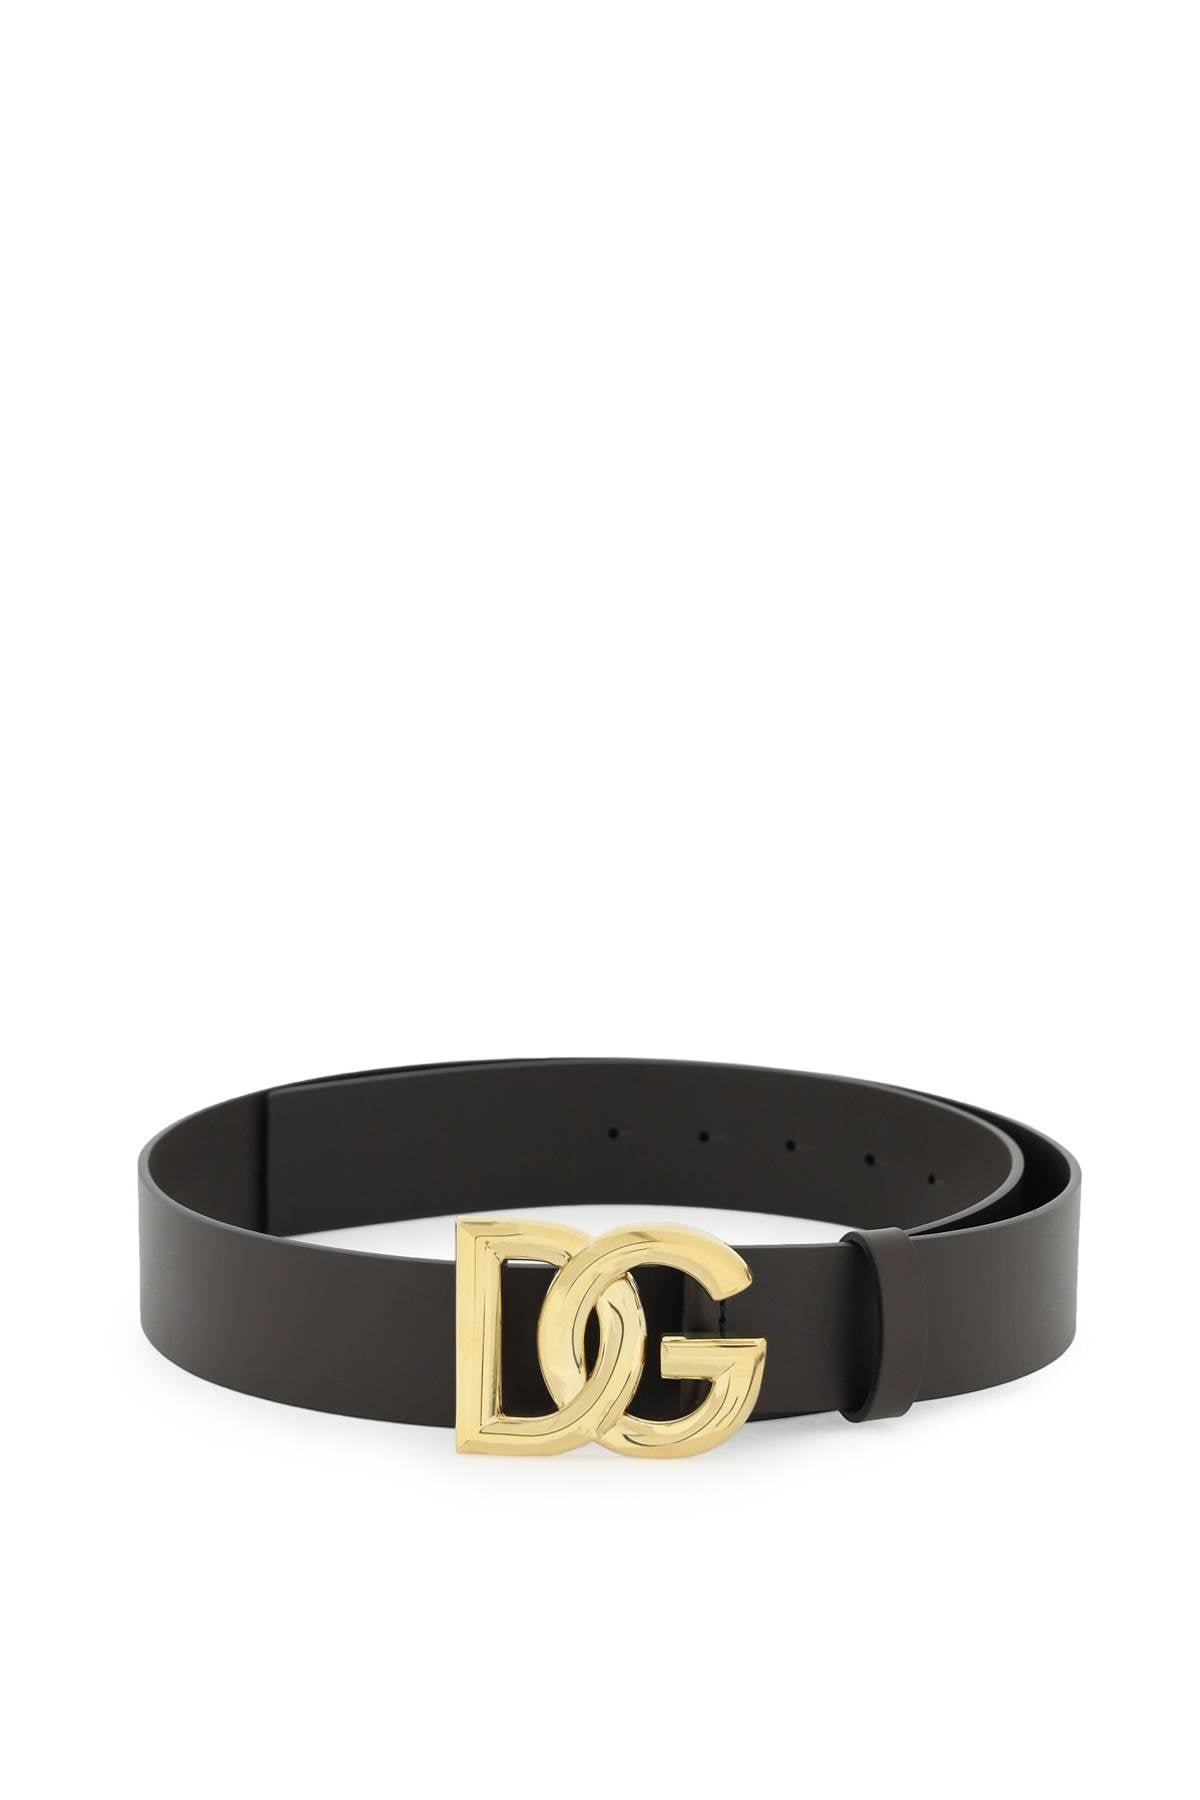 Dolce & gabbana lux leather belt with dg buckle-0